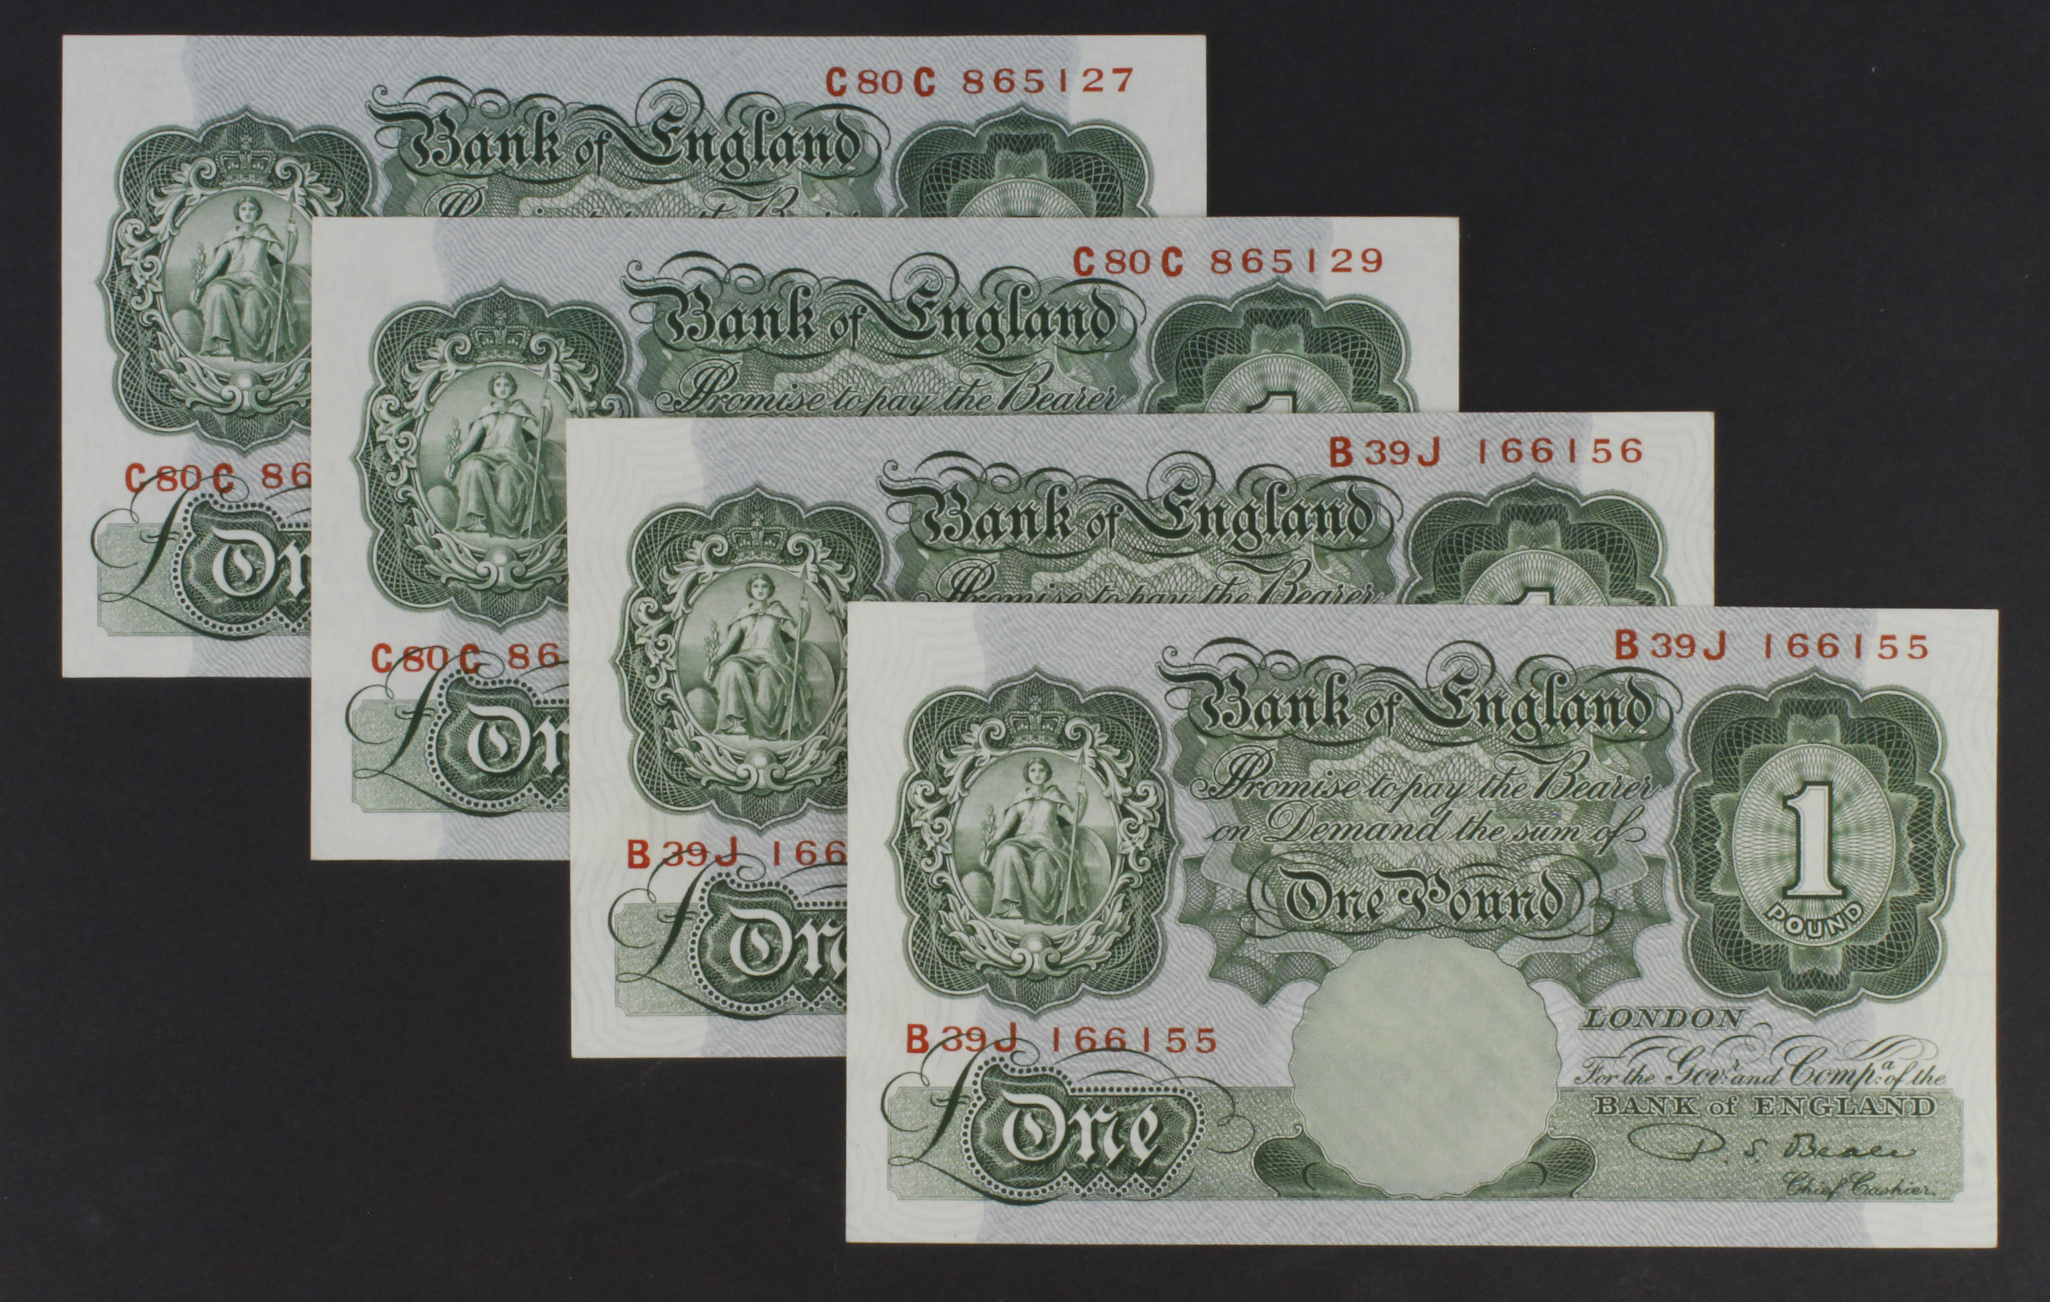 Beale 1 Pound (B268) issued 1950 (4), a consecutively numbered pair serial B39J 166155 & B39J